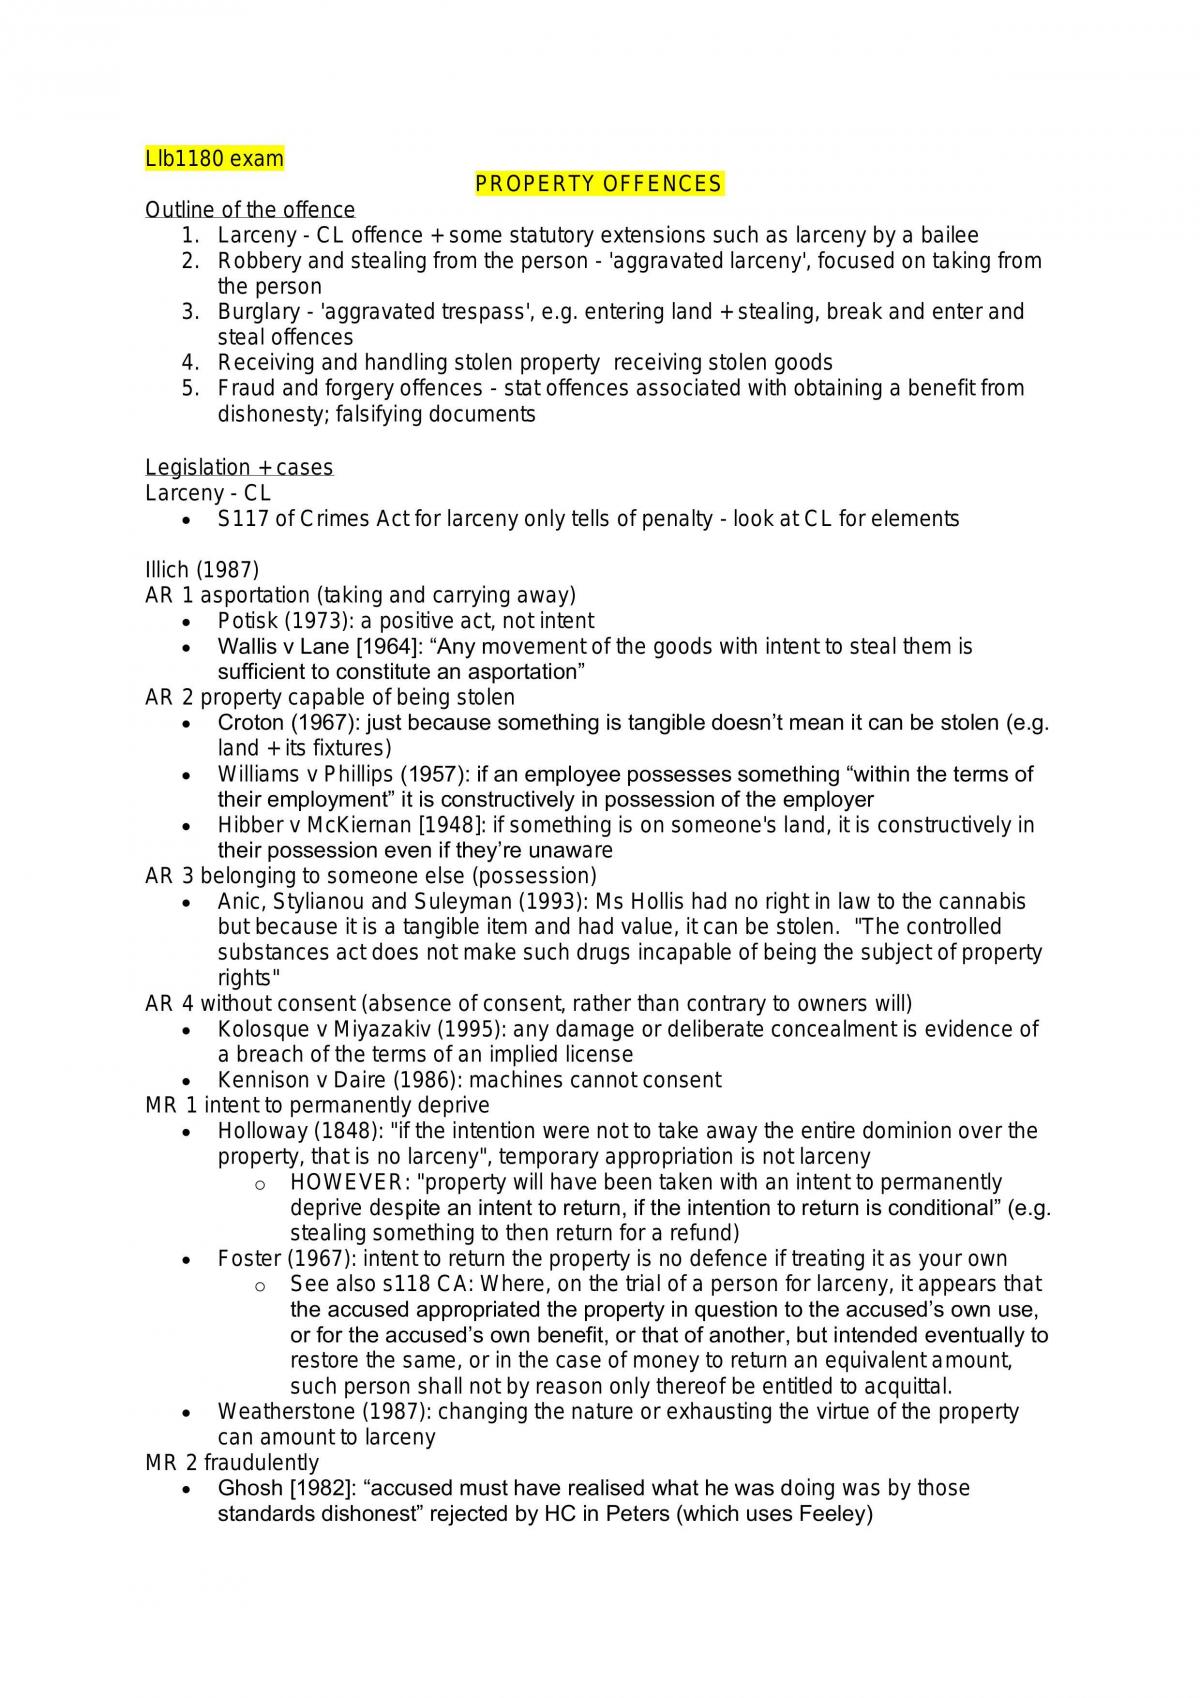 LLB1180 Full Notes - Page 1